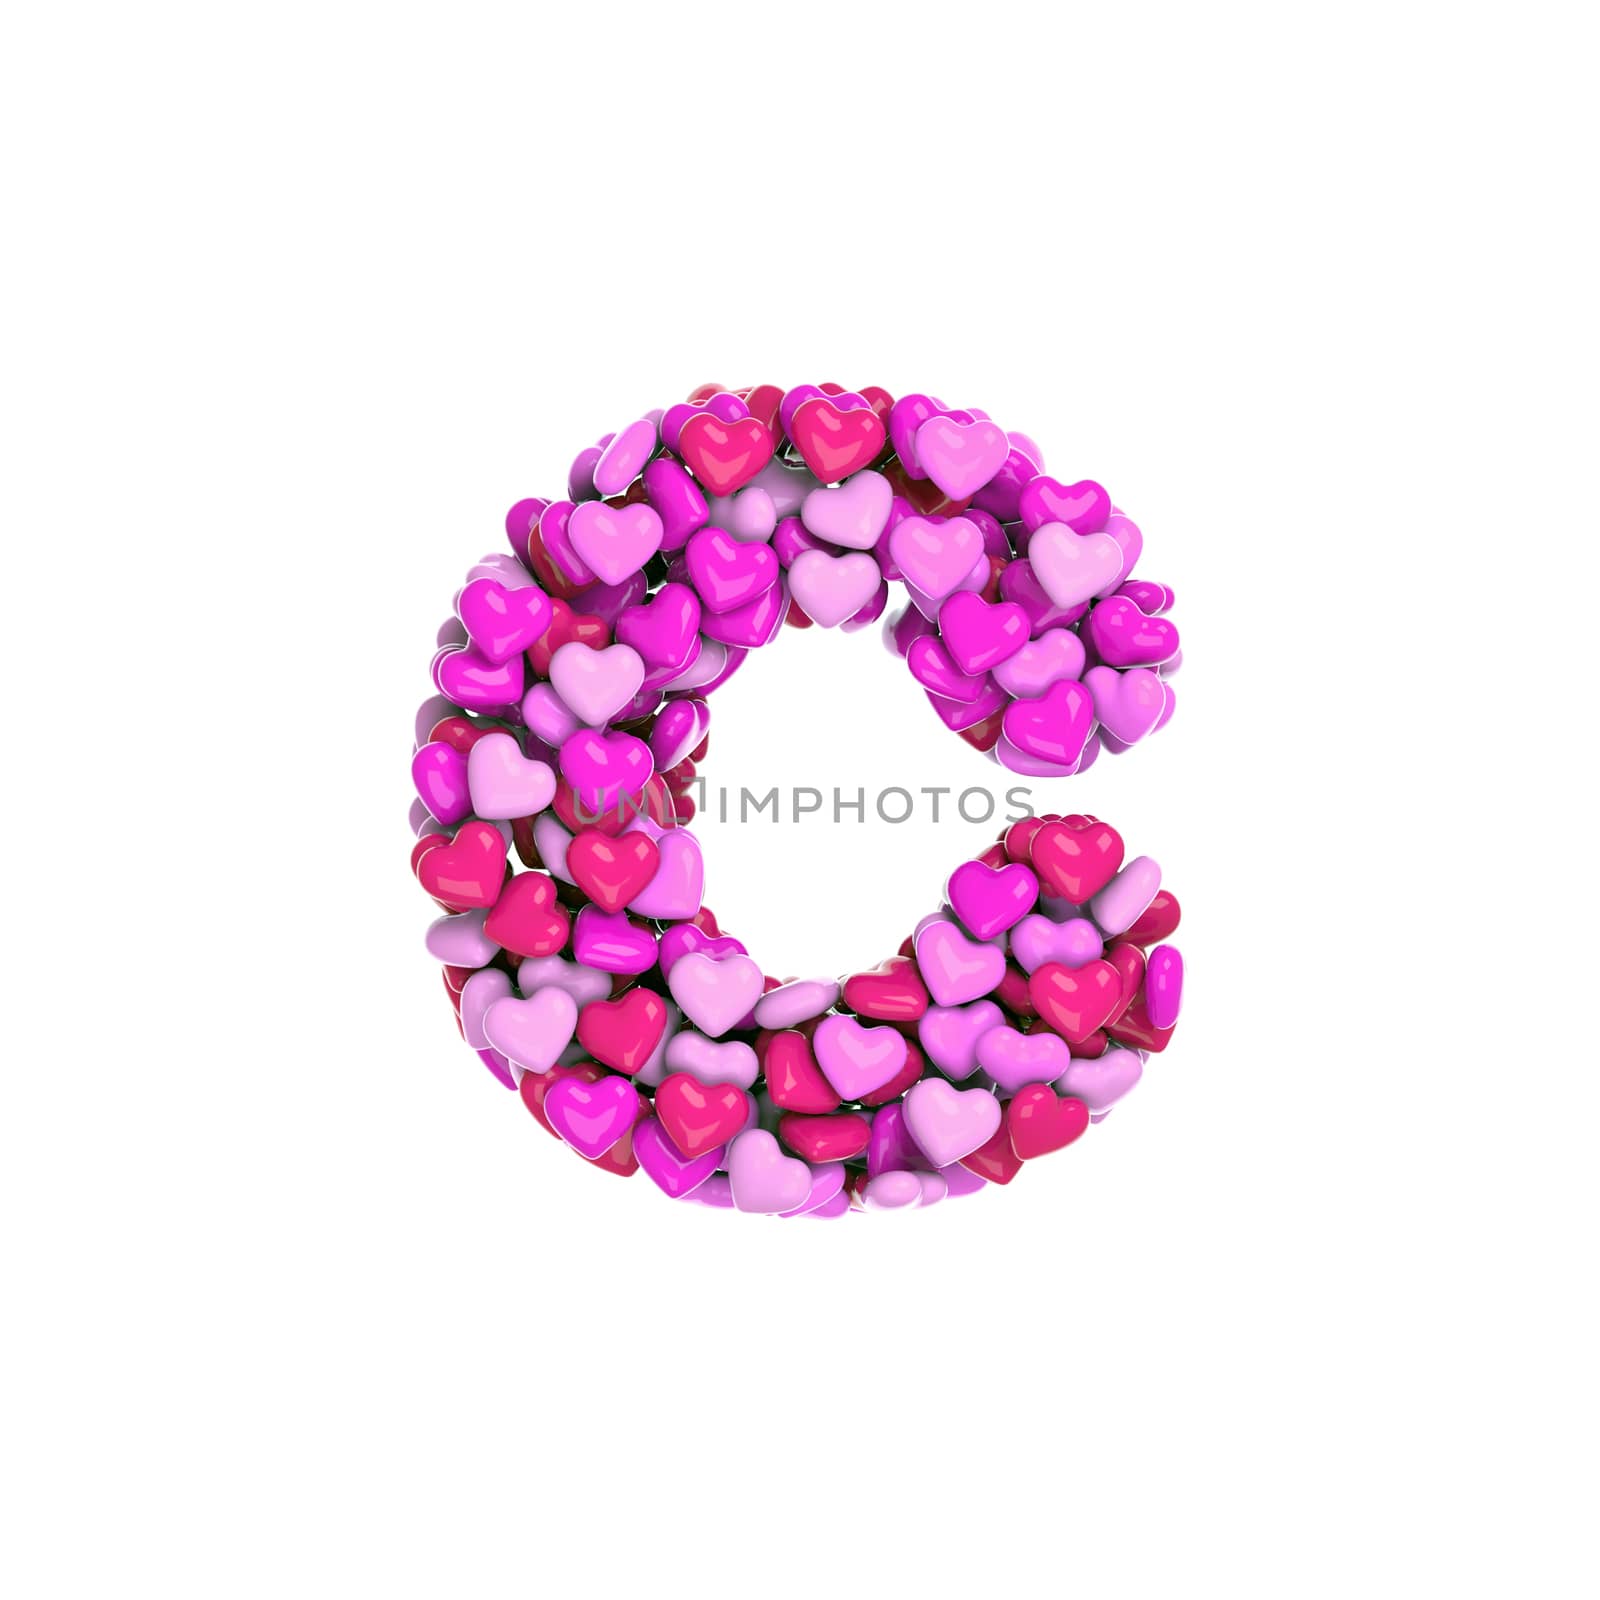 Valentine letter C - Lowercase 3d pink hearts font isolated on white background. This alphabet is perfect for creative illustrations related but not limited to Love, passion, wedding...